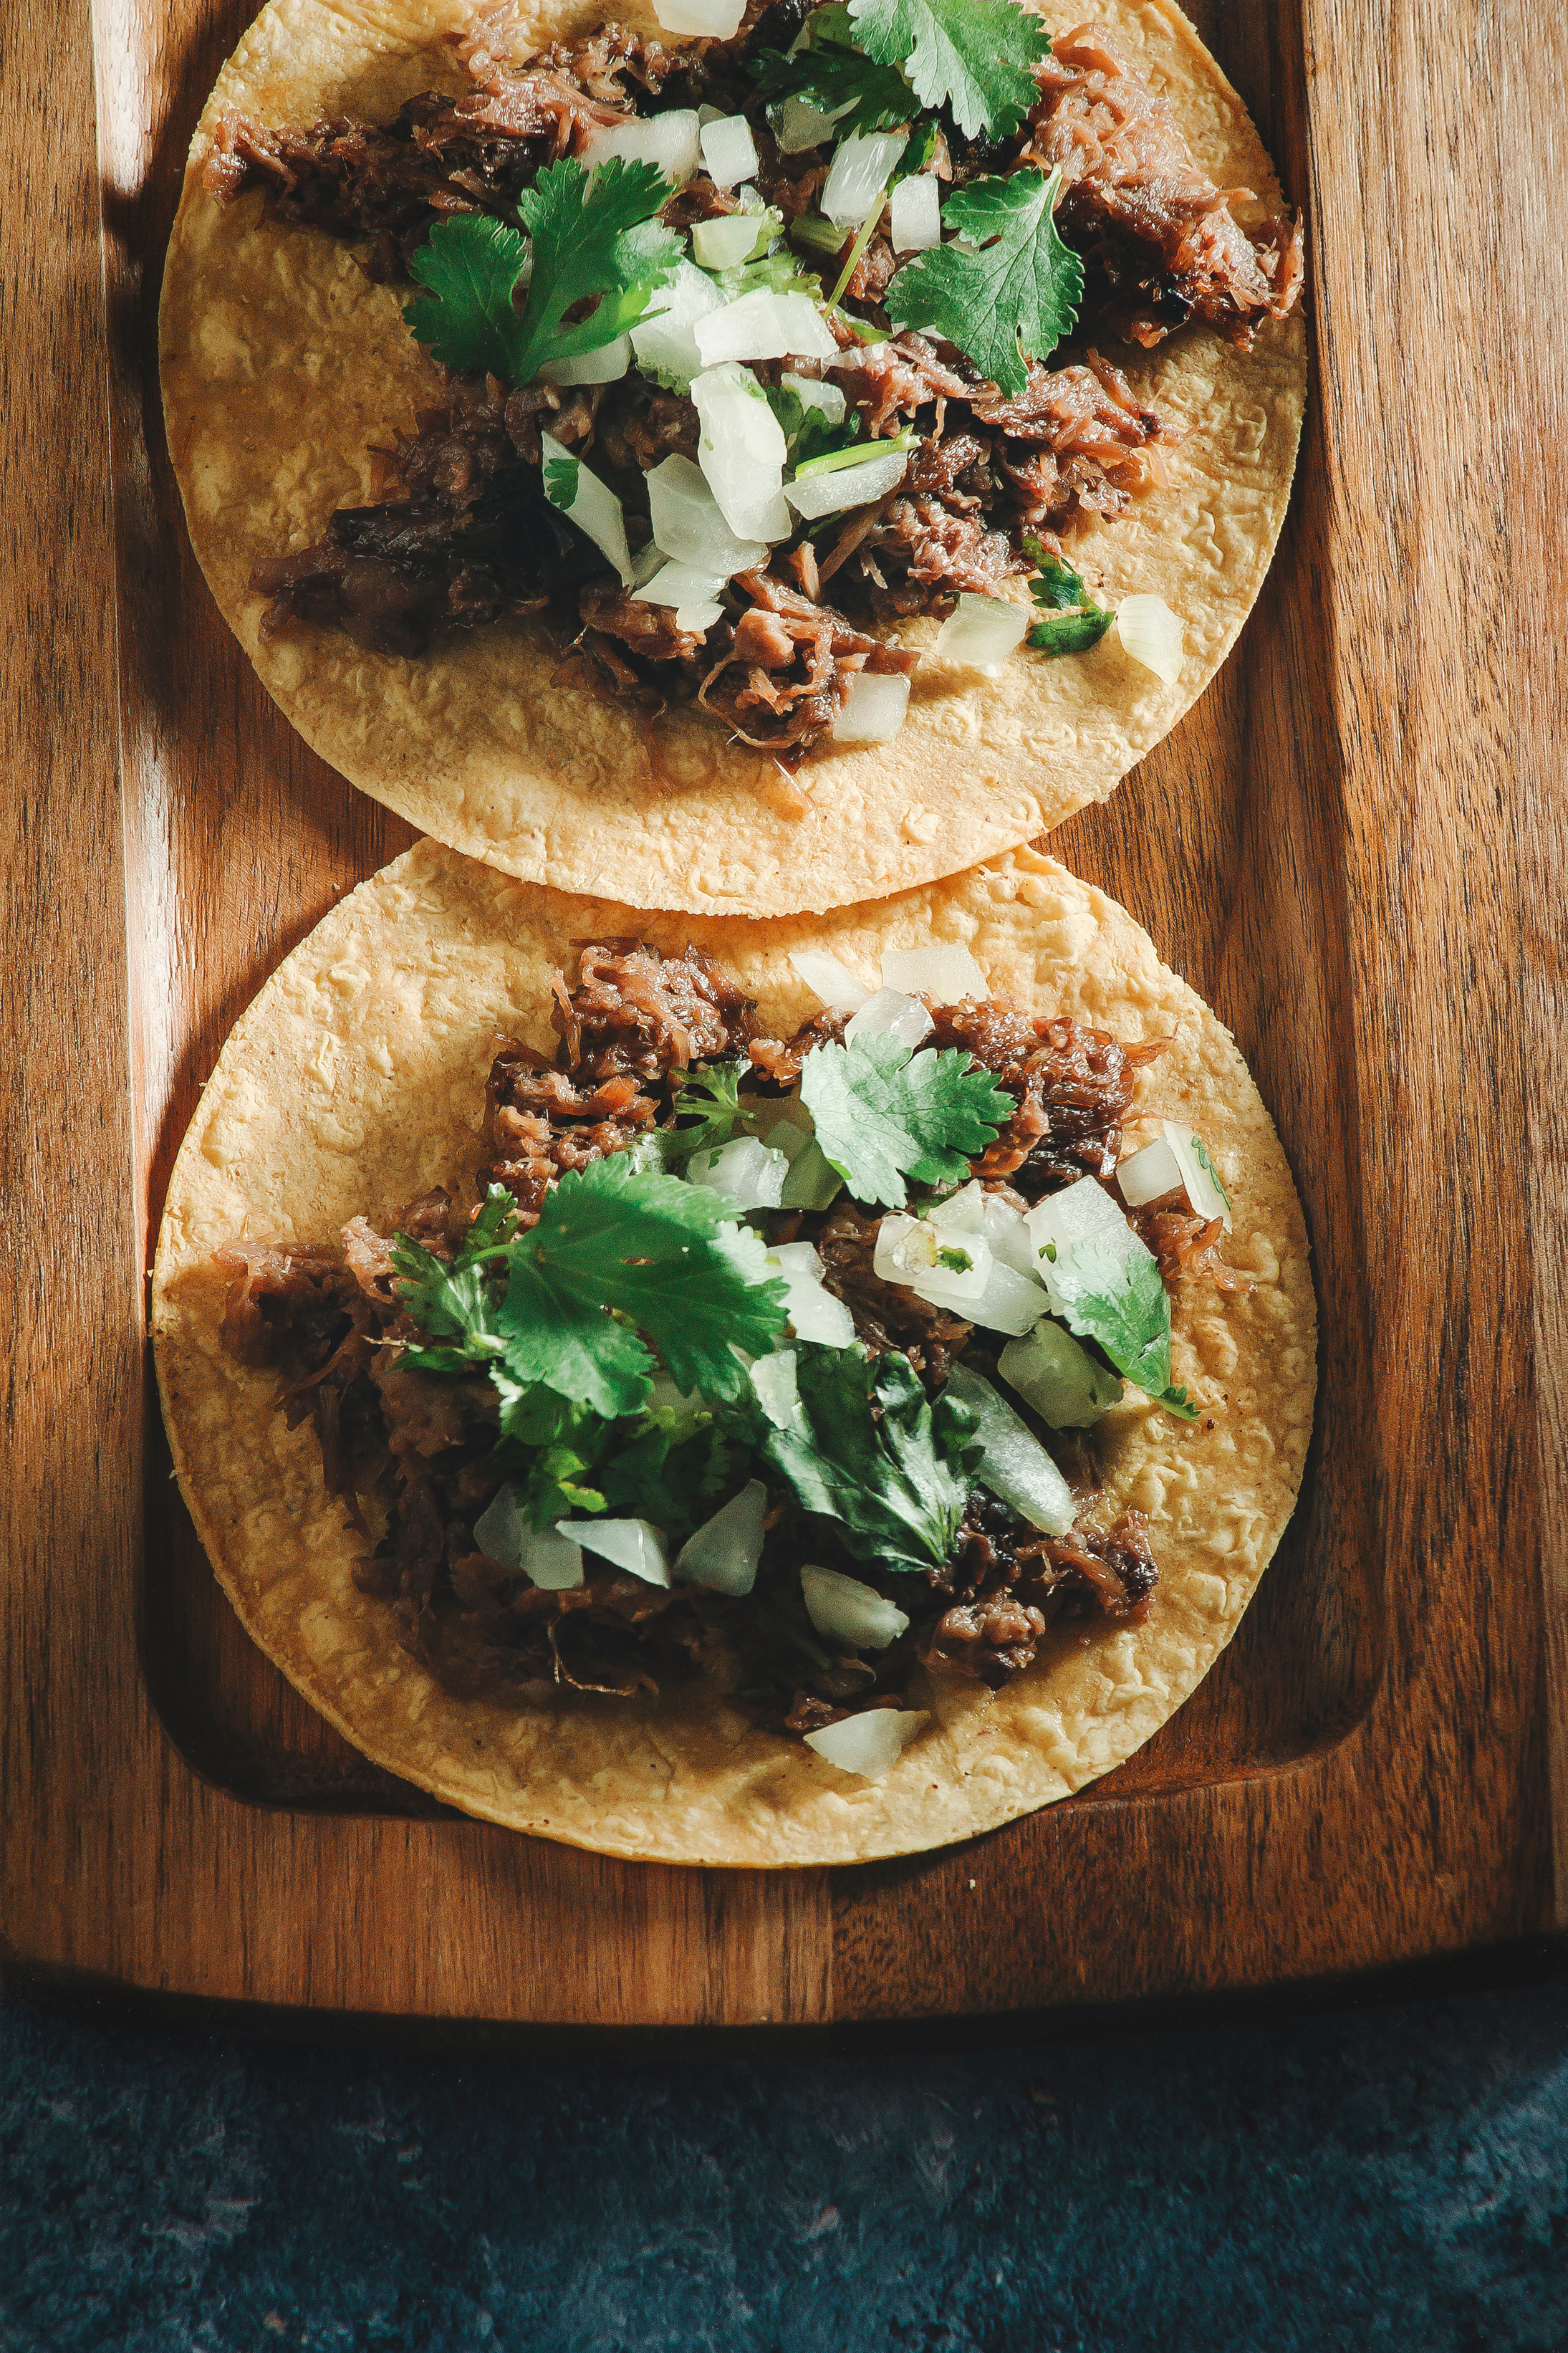 Tacos with Beef Barbecue, Coriander and Onions on Wooden Tray